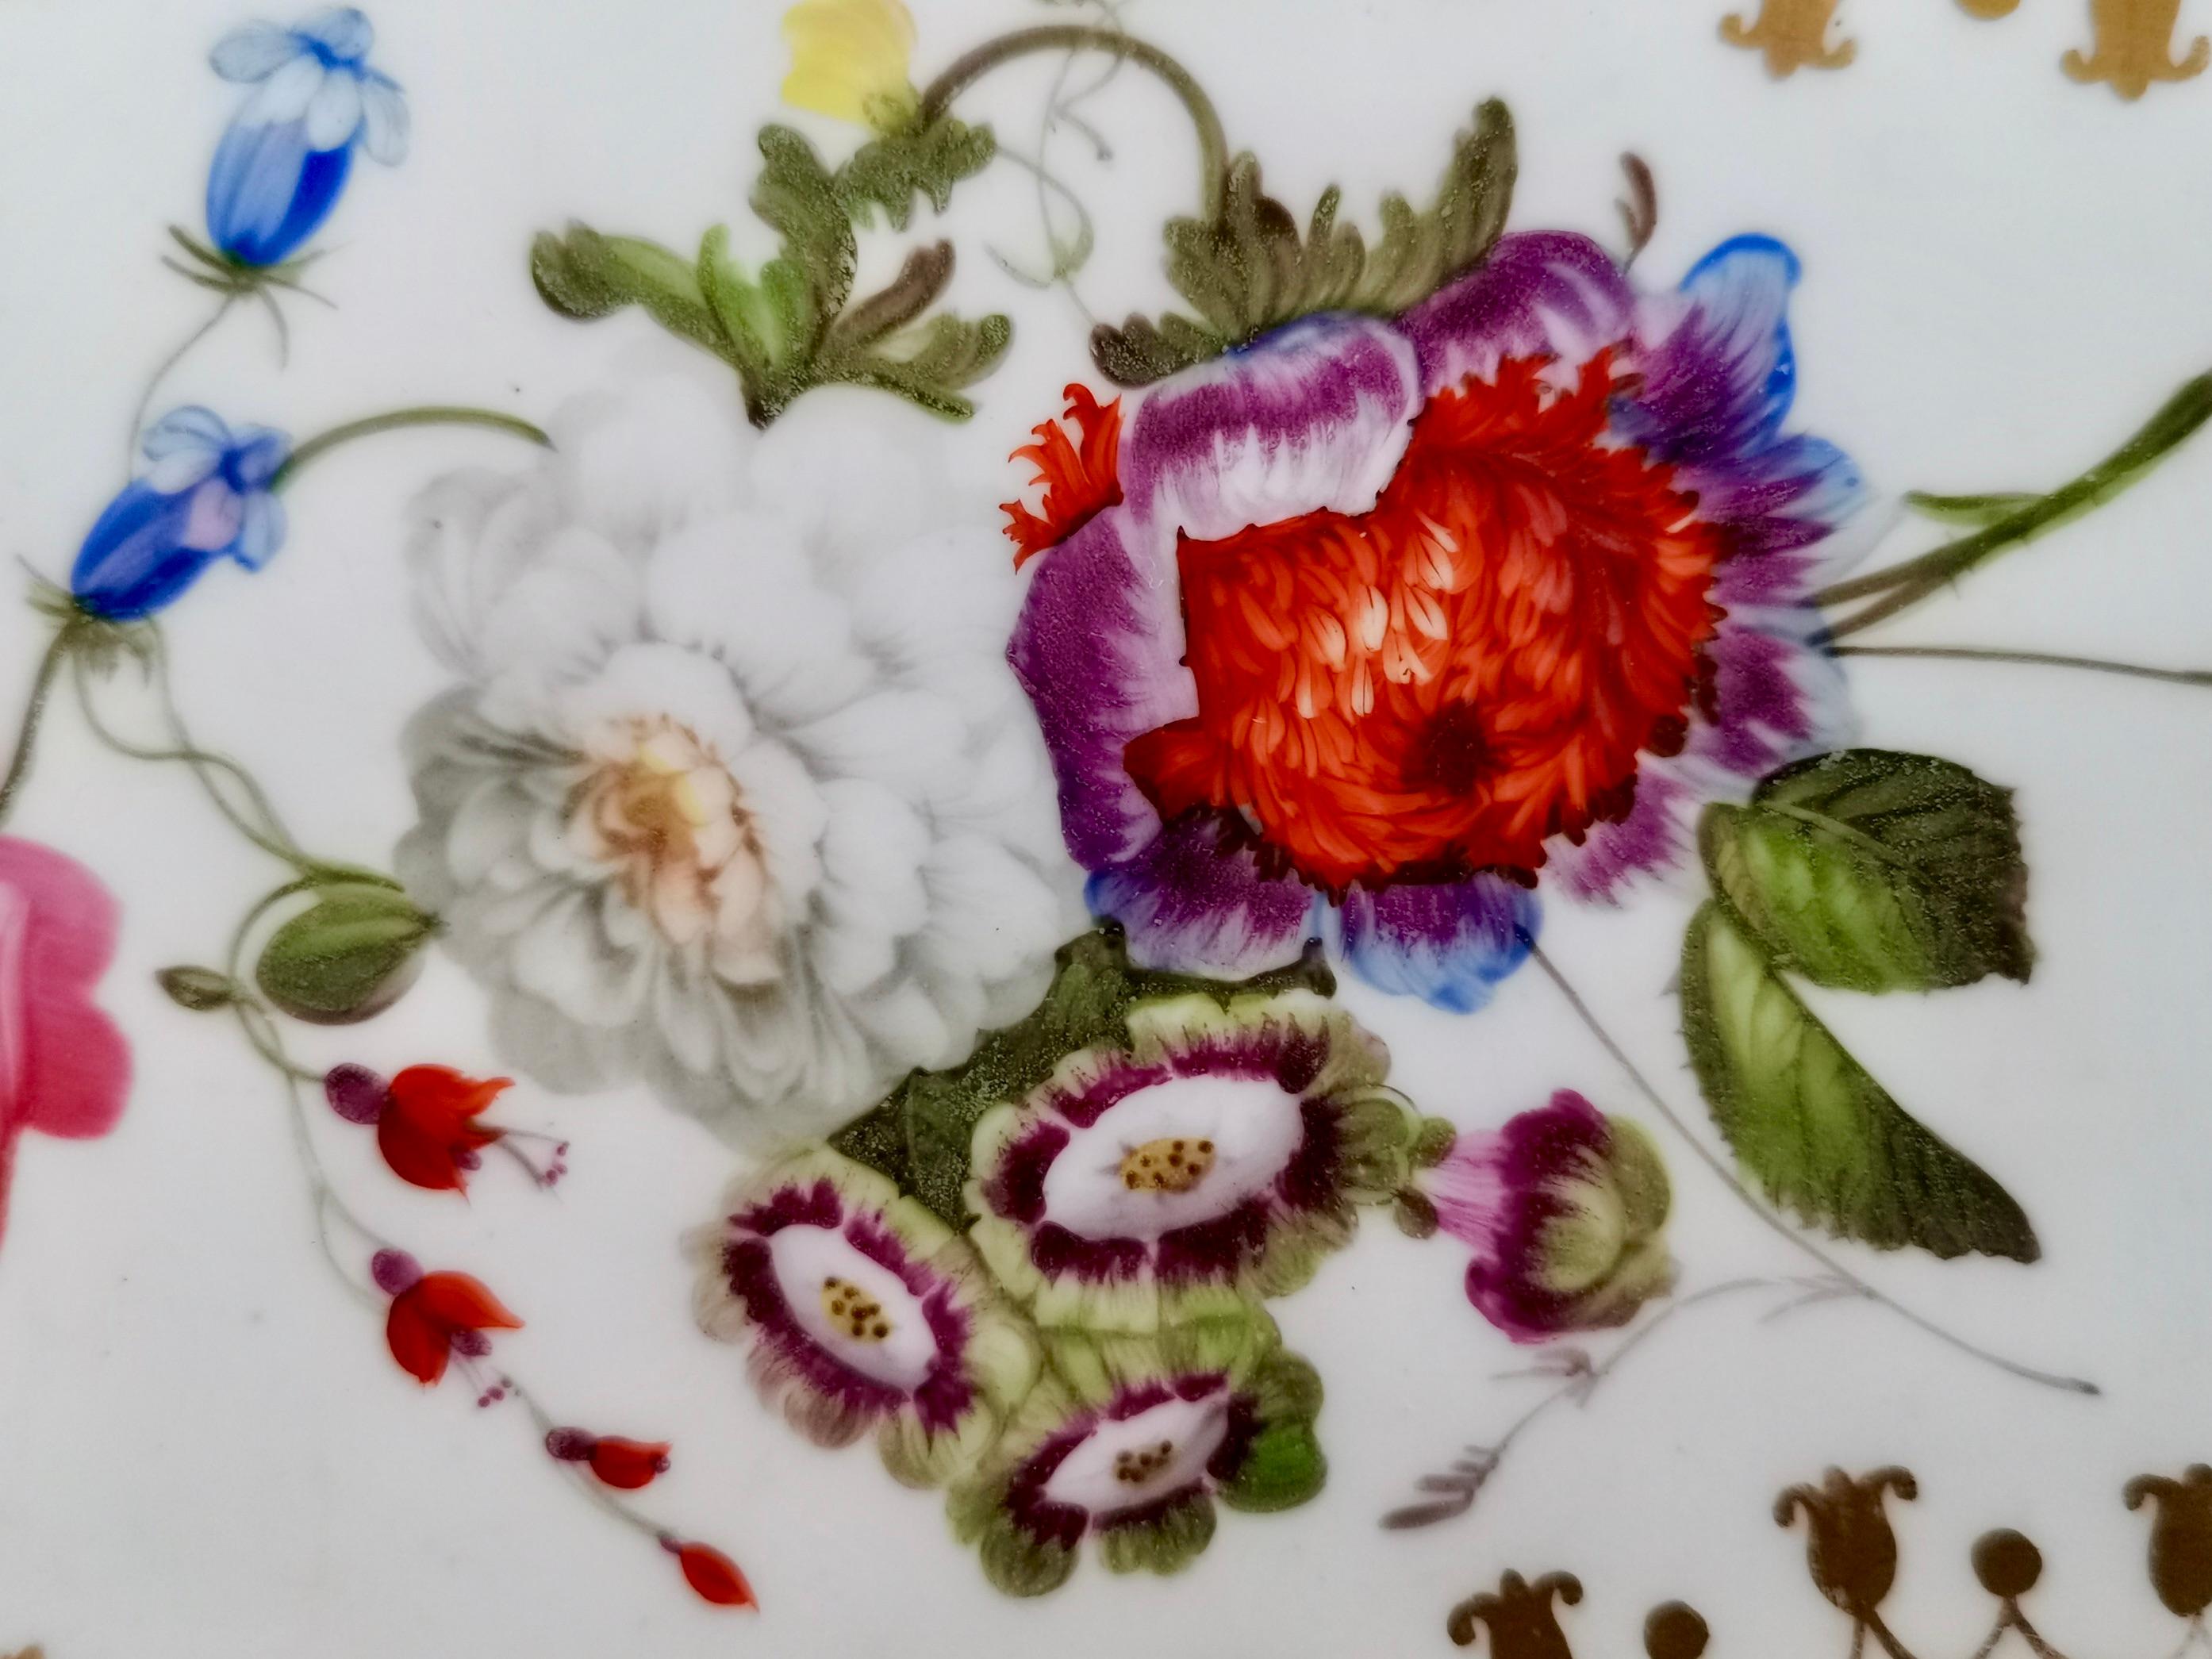 English Spode Felspar Serving Dish, Maroon with Sublime Flowers, 1831